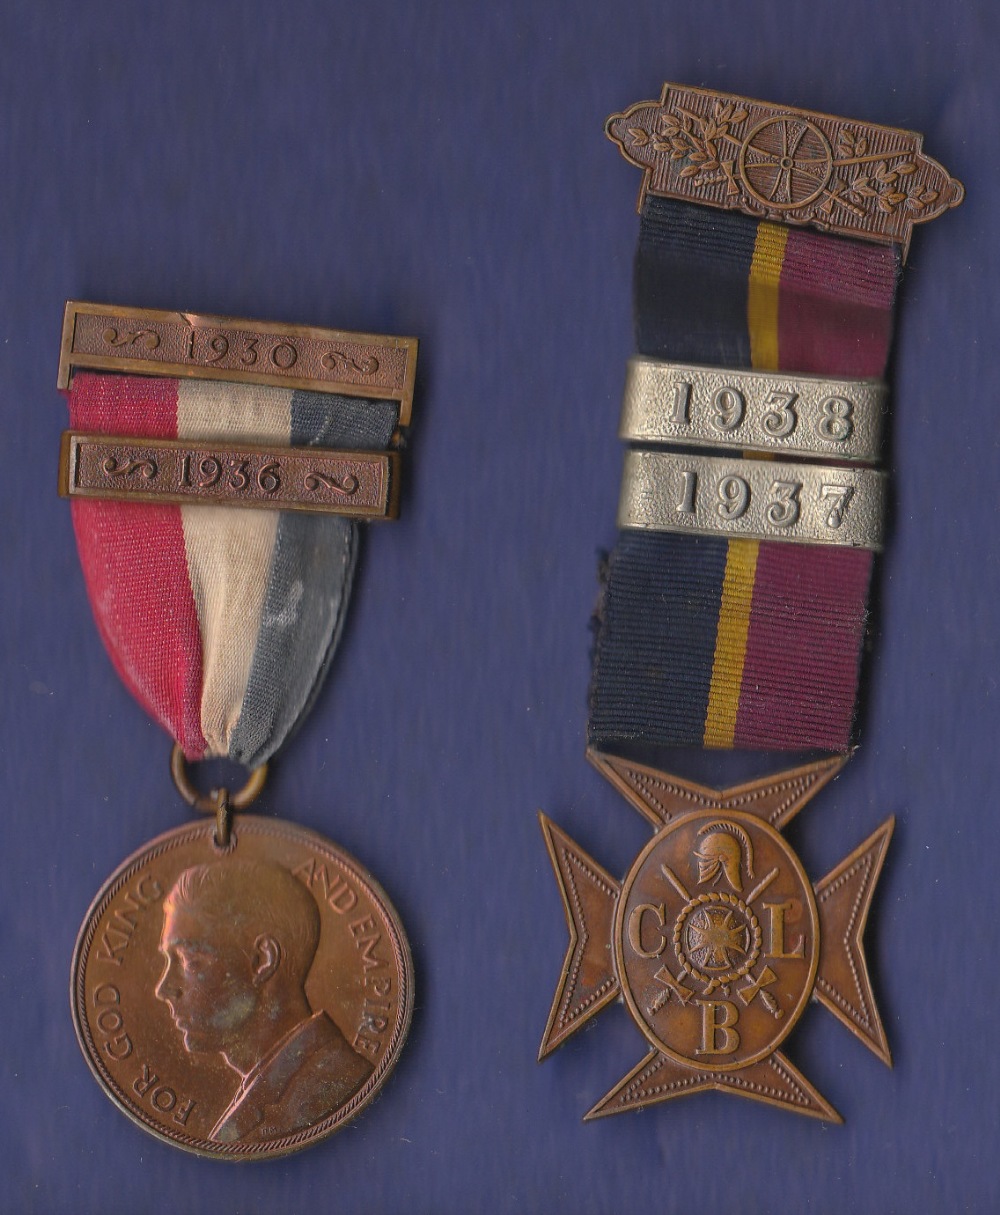 Church Lads Brigade with 1937 & 1938 clasps, and King Edward VIII British Empire Day with 1930 and